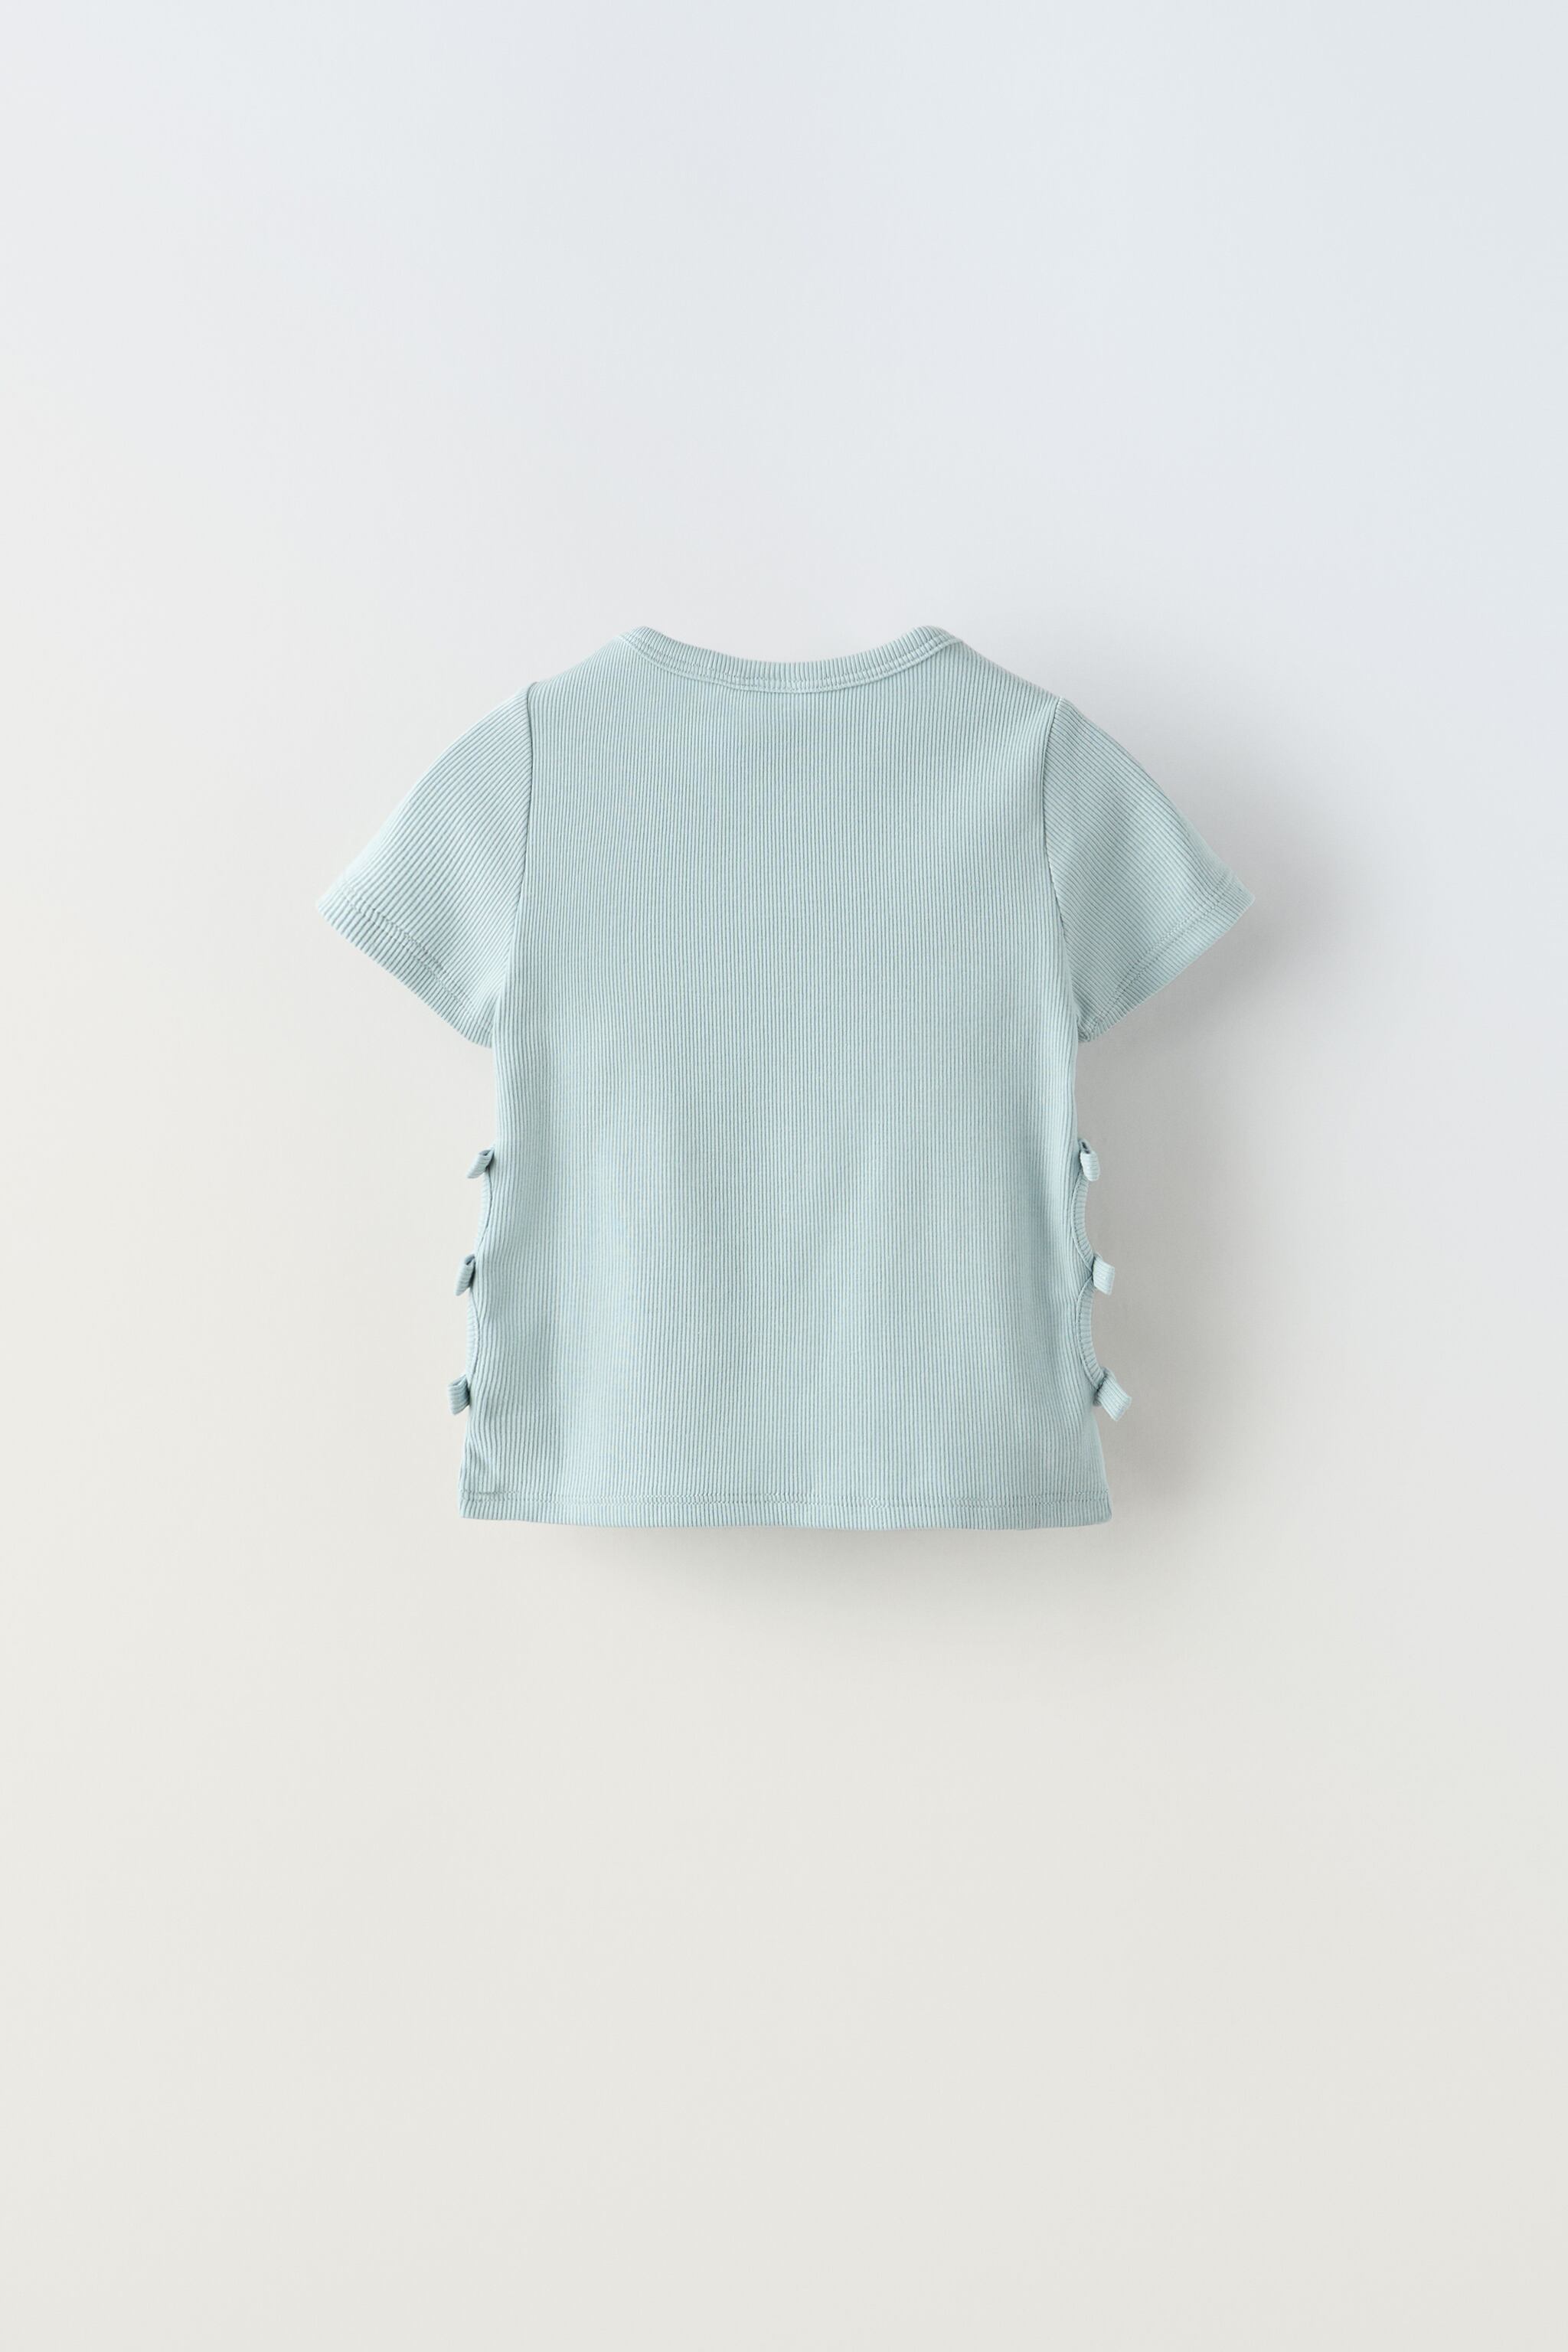 CUT OUT T-SHIRT WITH BOWS